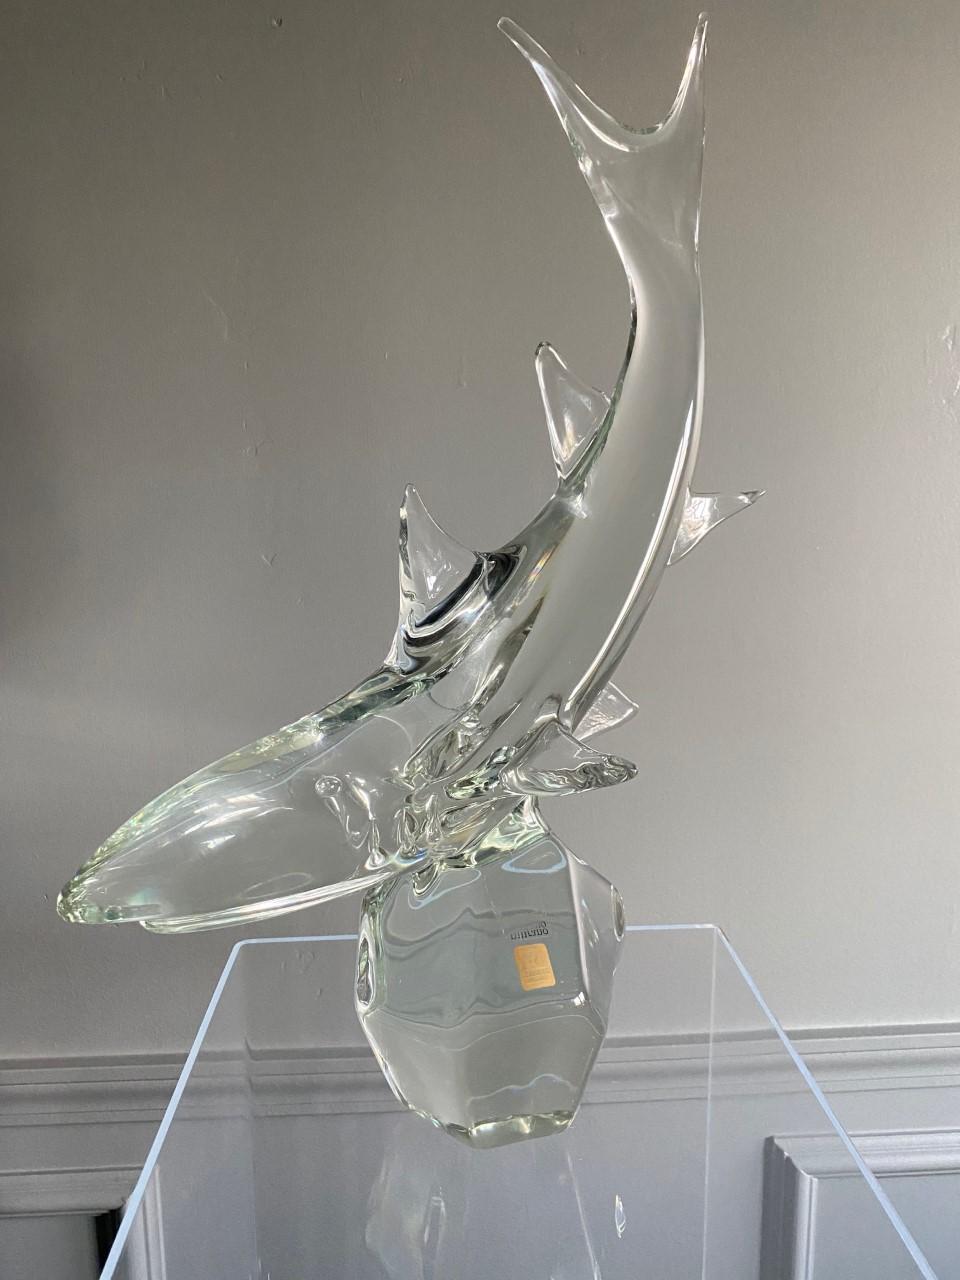 Beautifully crafted sculpture by Licio Zanetti, circa 1960s. The condition of the glass is clean, sharp and clear with no scratches. This sculpture is ice like and fluid. The quality of the Murano glass is undeniable and allows the piece to move